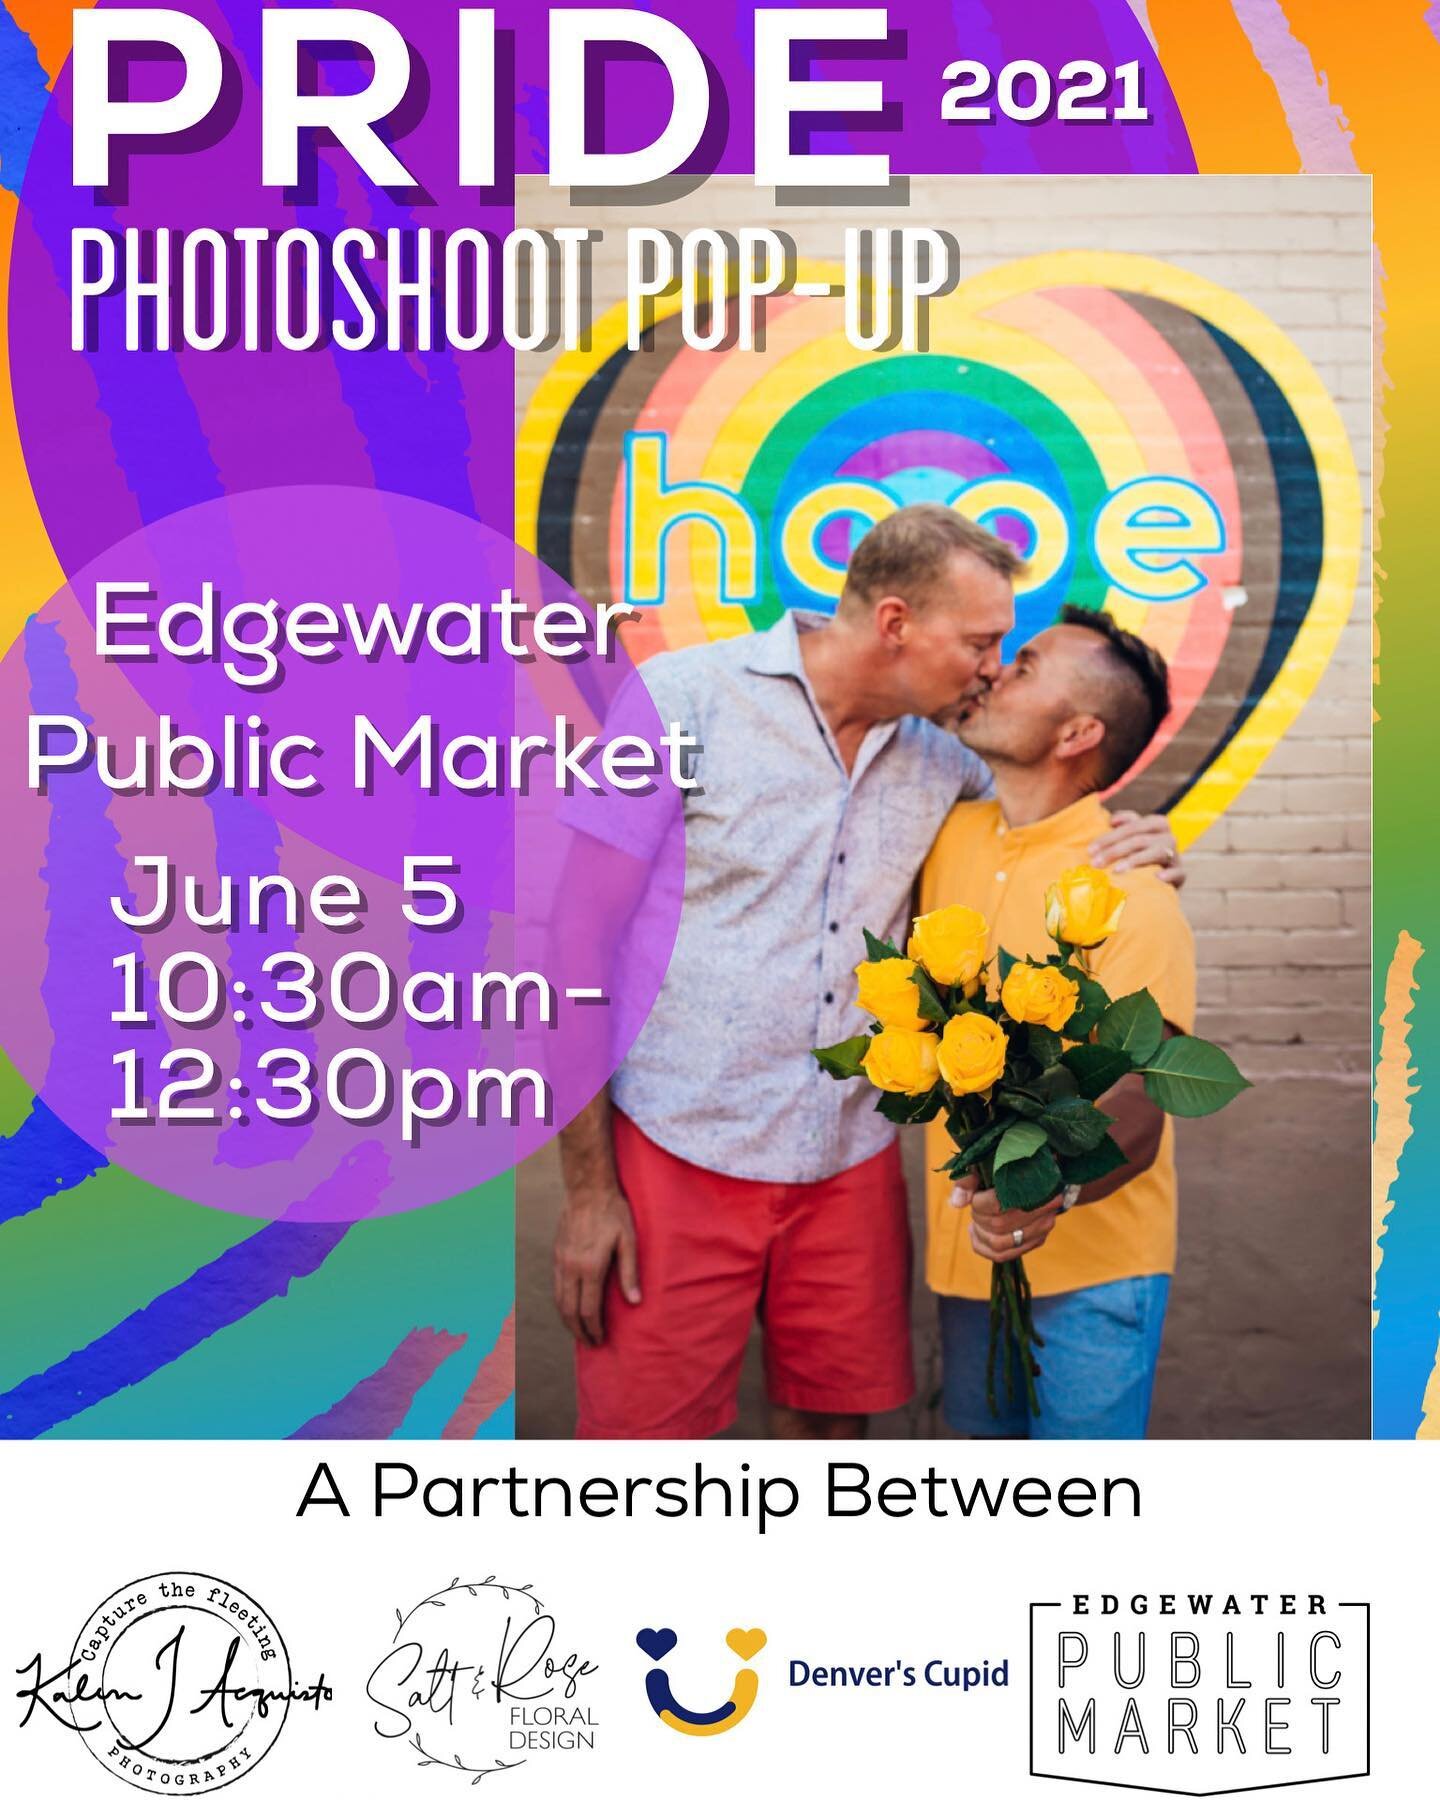 Hey everyone, it&rsquo;s time for Pride!!! Check out our Mini Photoshoot session for Pride taken by @kalenjessephotography. Mini shoots are normally $375, but they are $65 each for Pride! Bring Friends, your partner or dog! We have a beautiful faux f